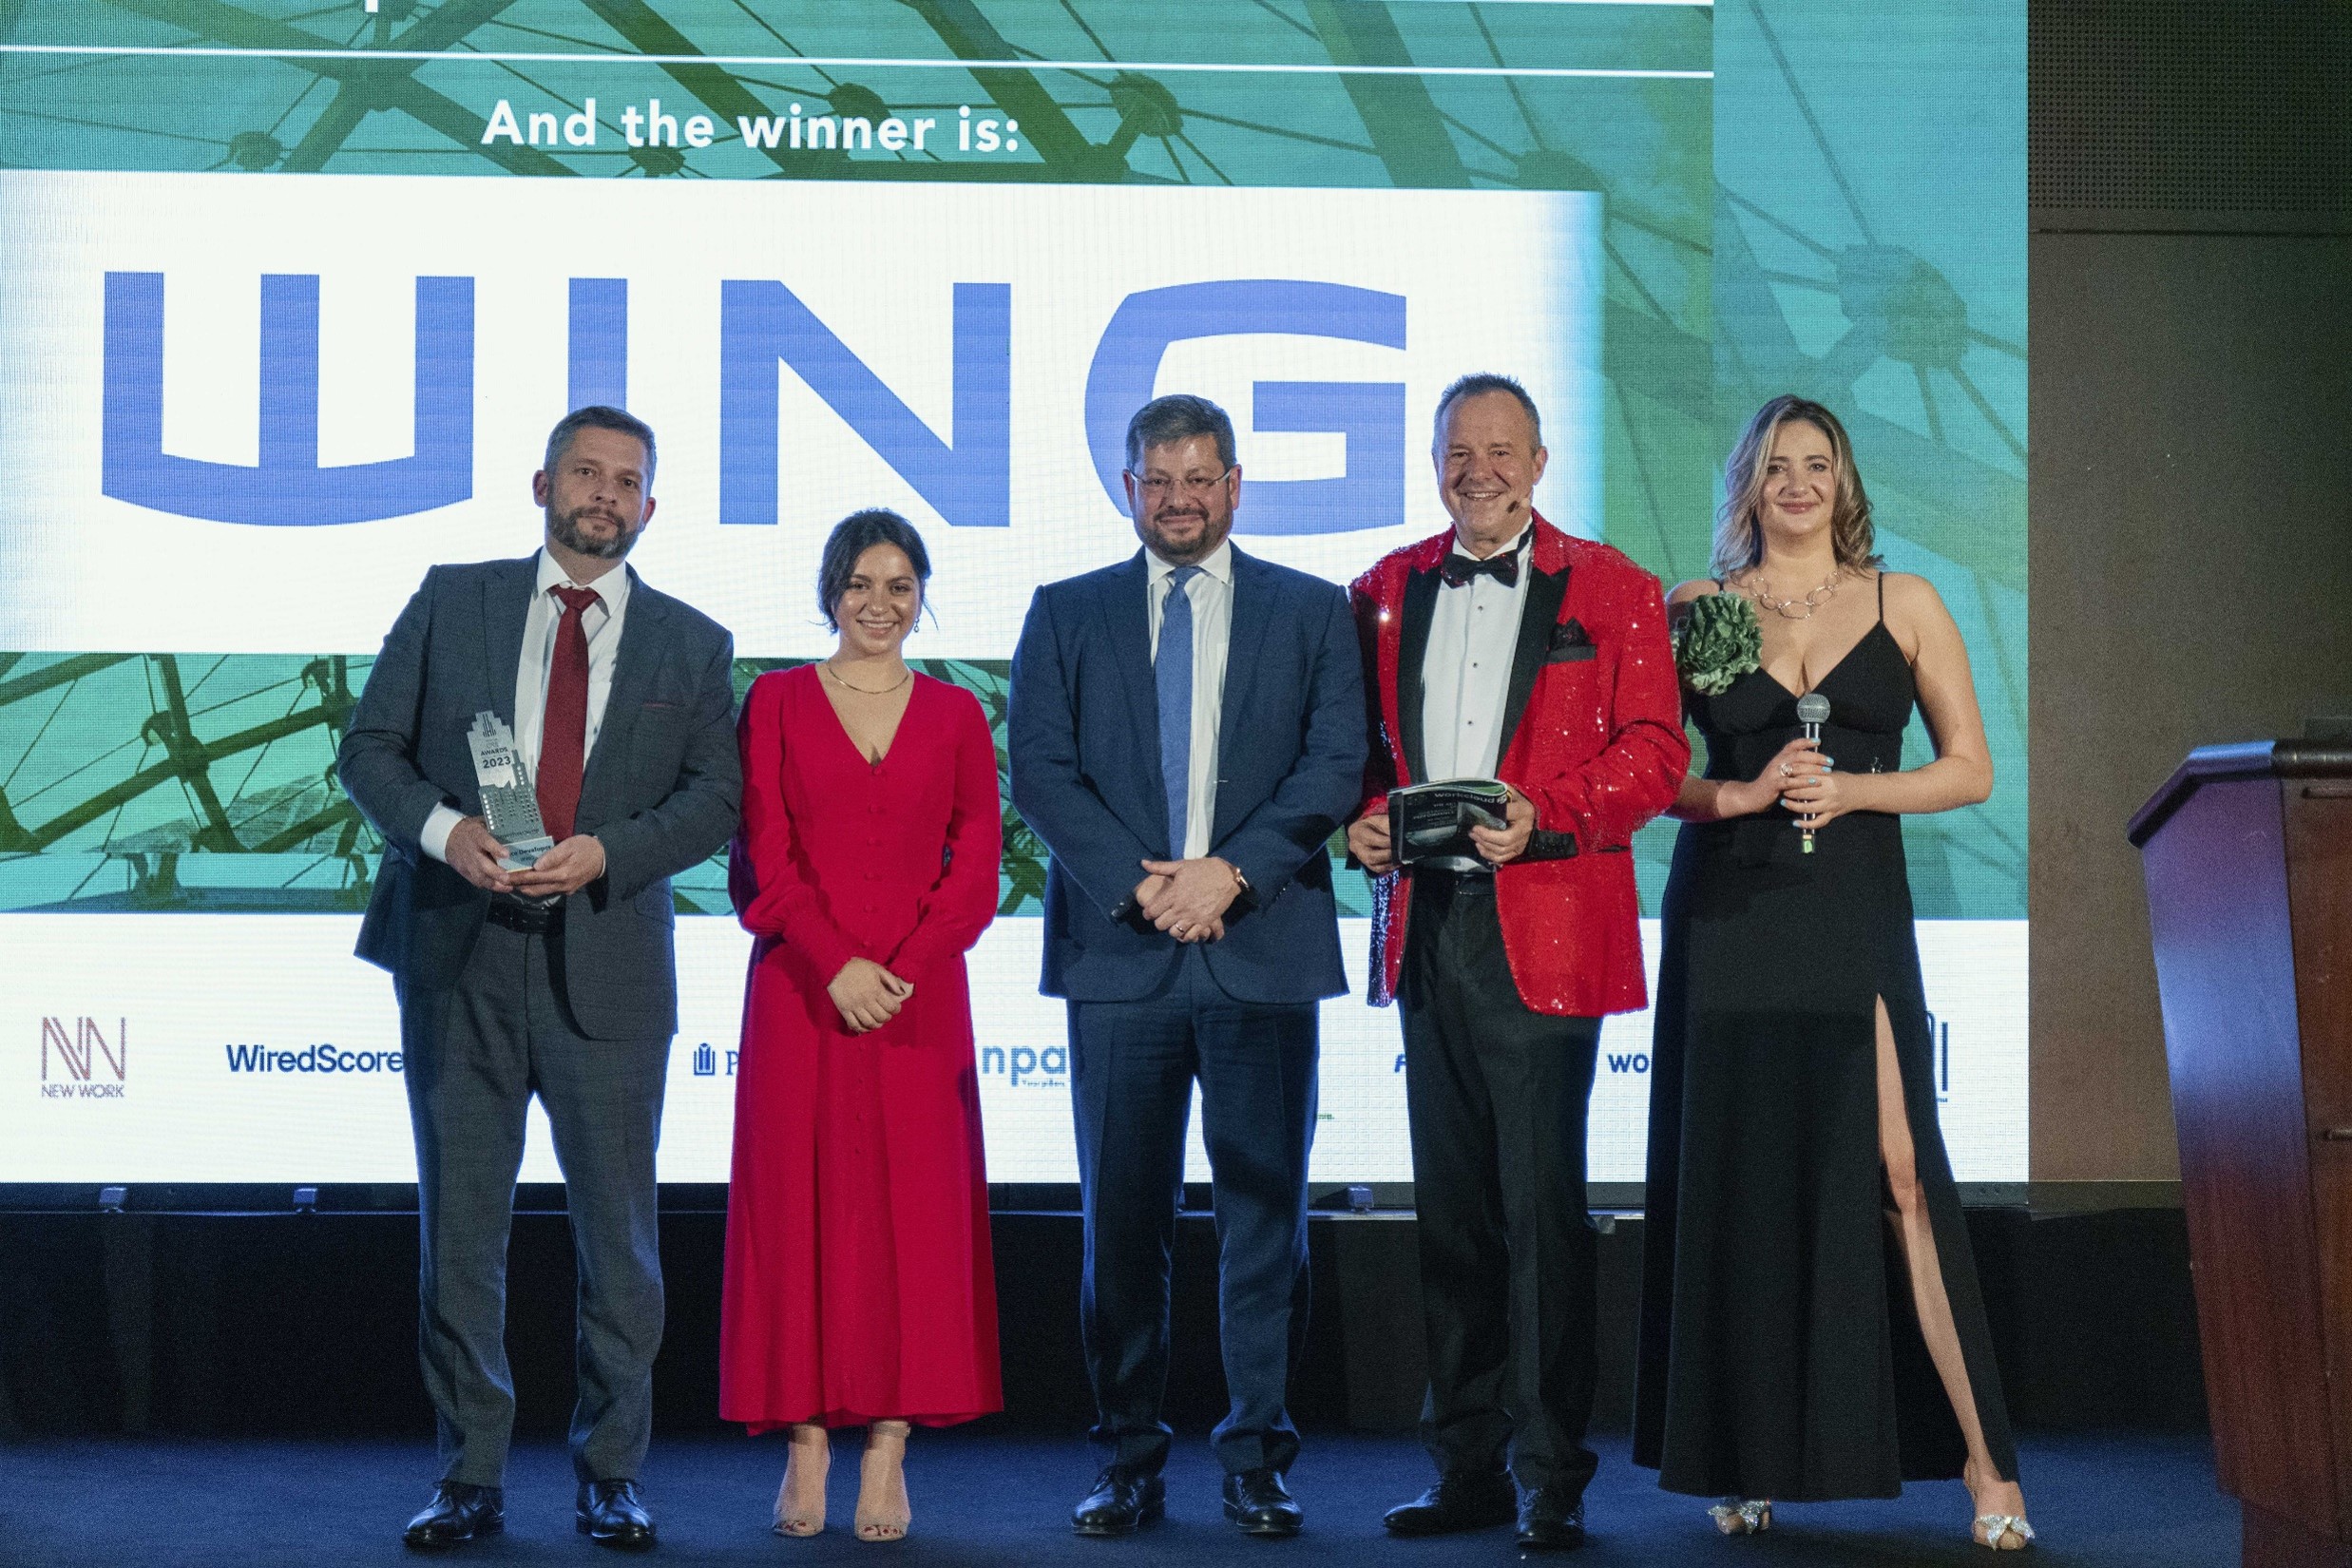 CRE International Real Estate Awards: WING ranked 1st in four categories